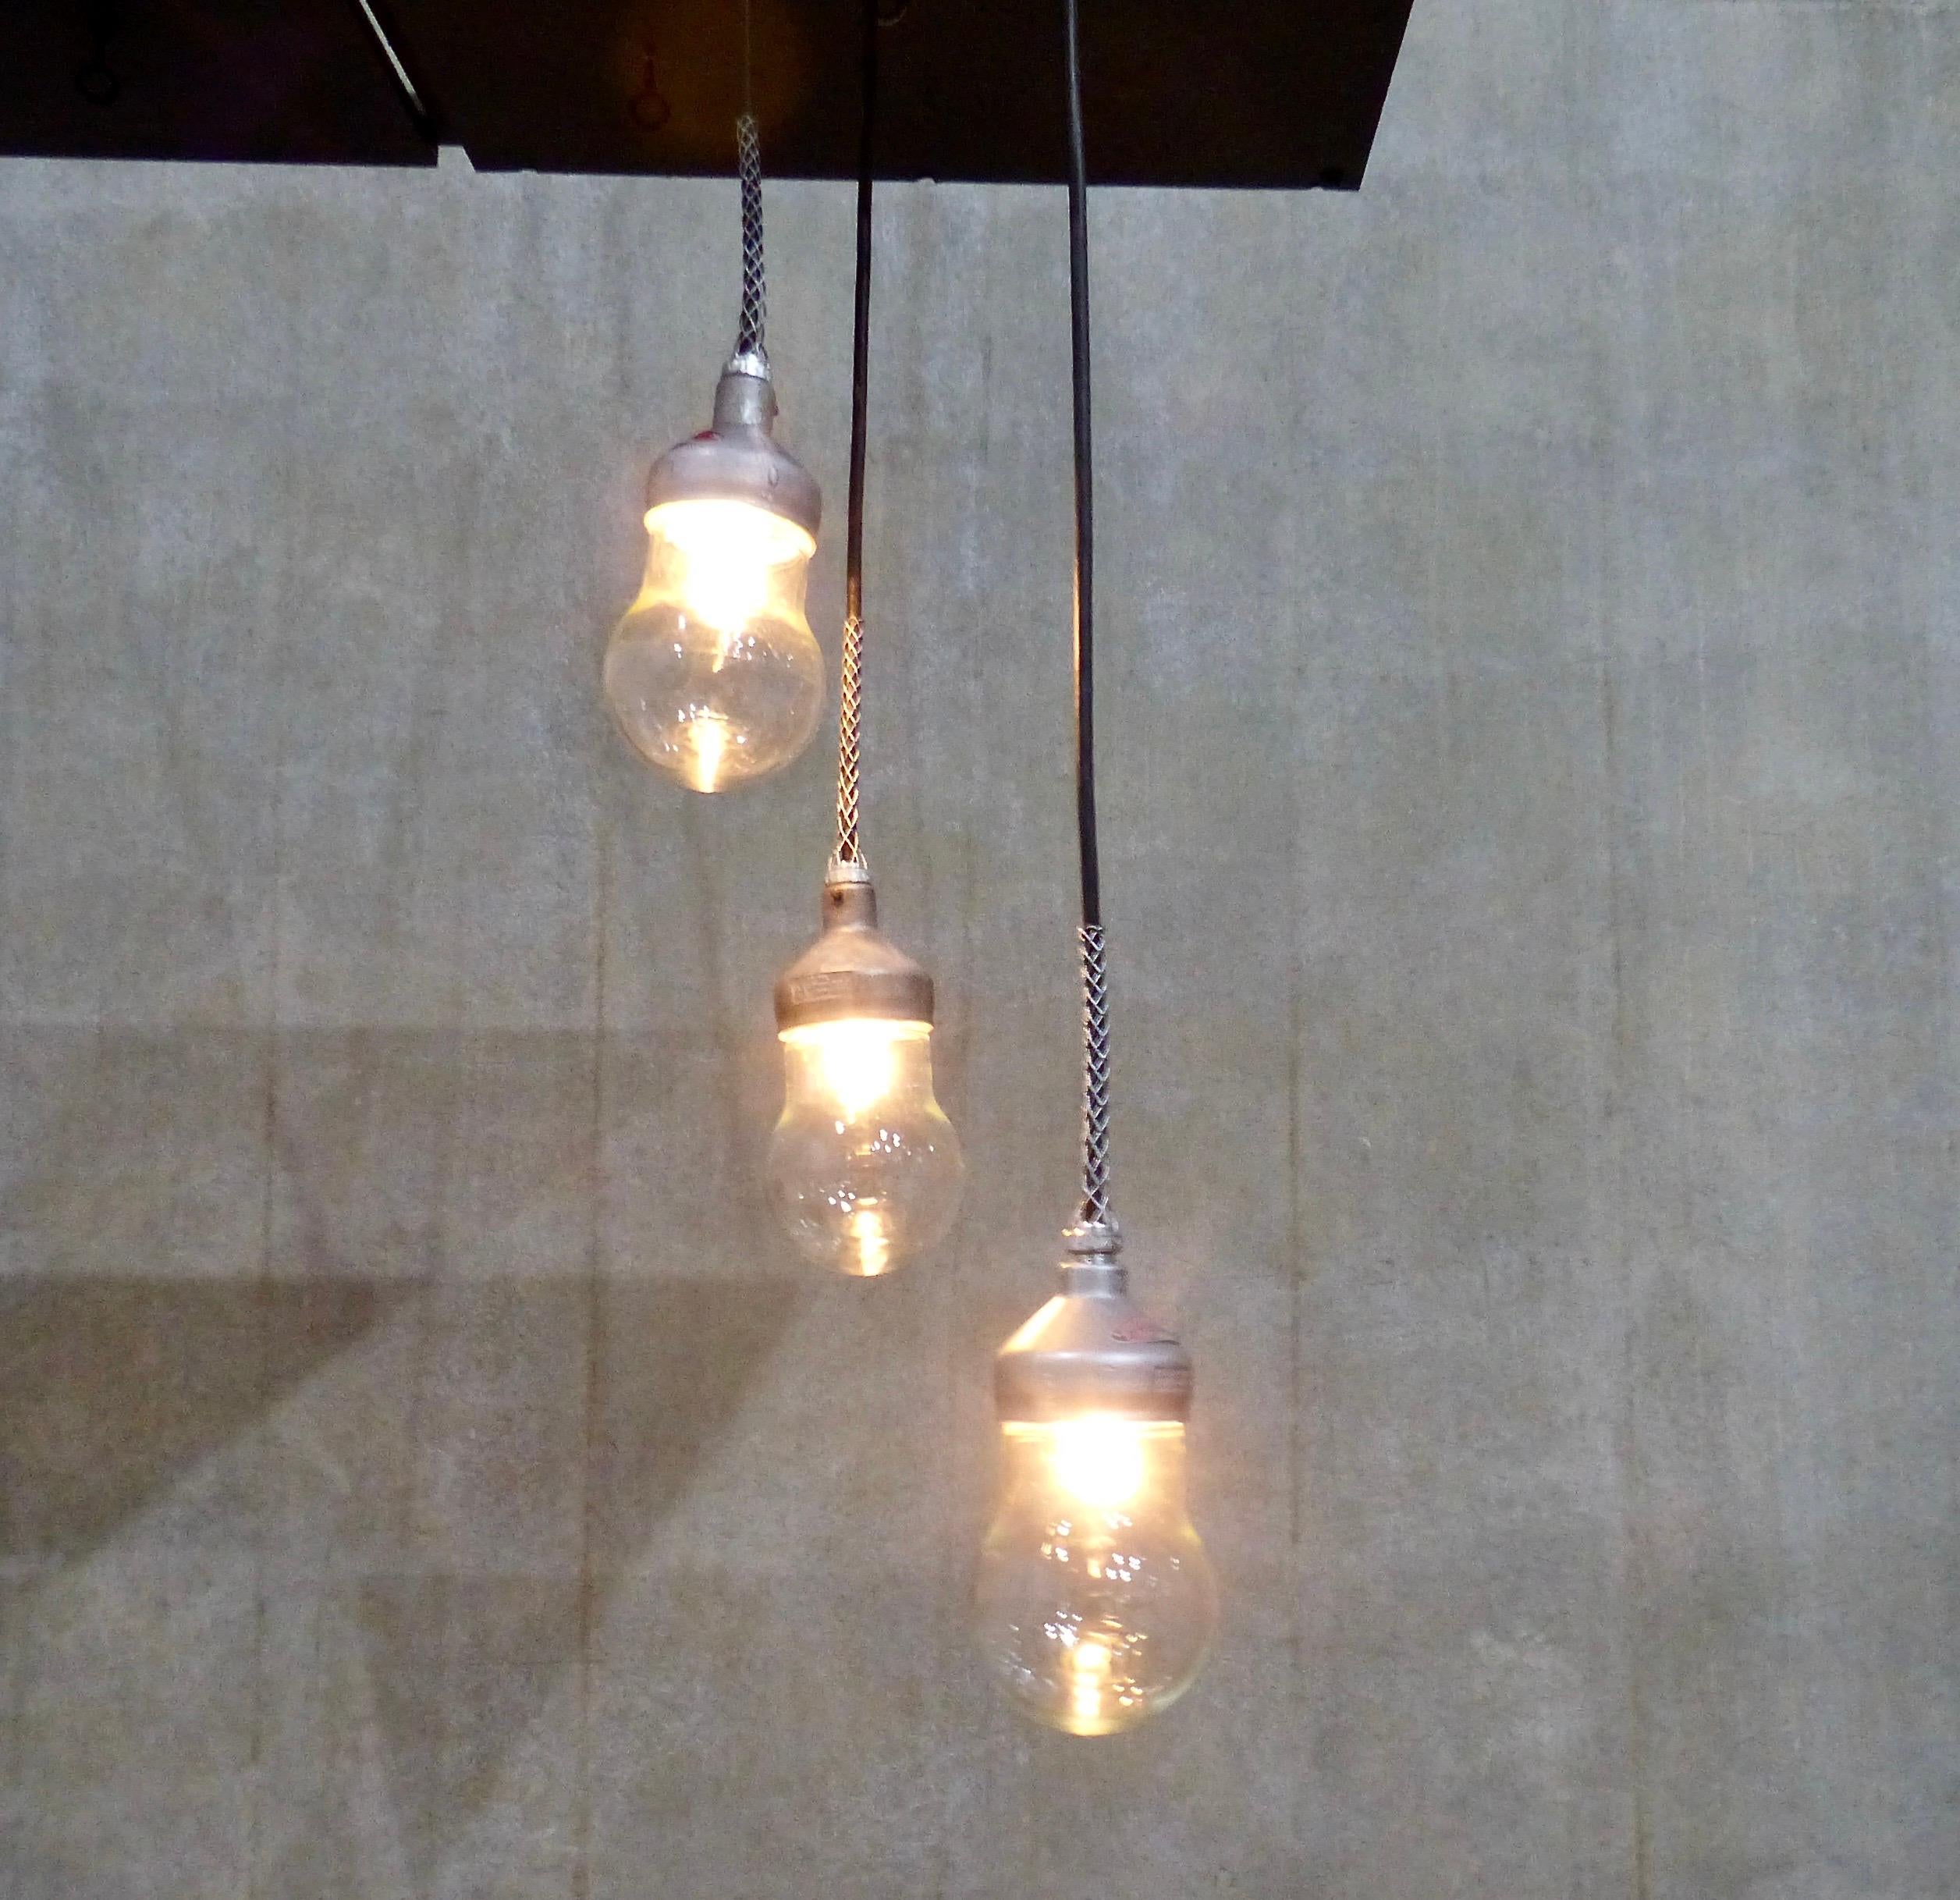 The rare, smallest version of Crouse Hinds Industrial pendants. These circa 1930 lights are made with cast metal tops and feature teardrop glass shades. Inspected and approved to current electrical standards; ceiling mounting plate included. Height